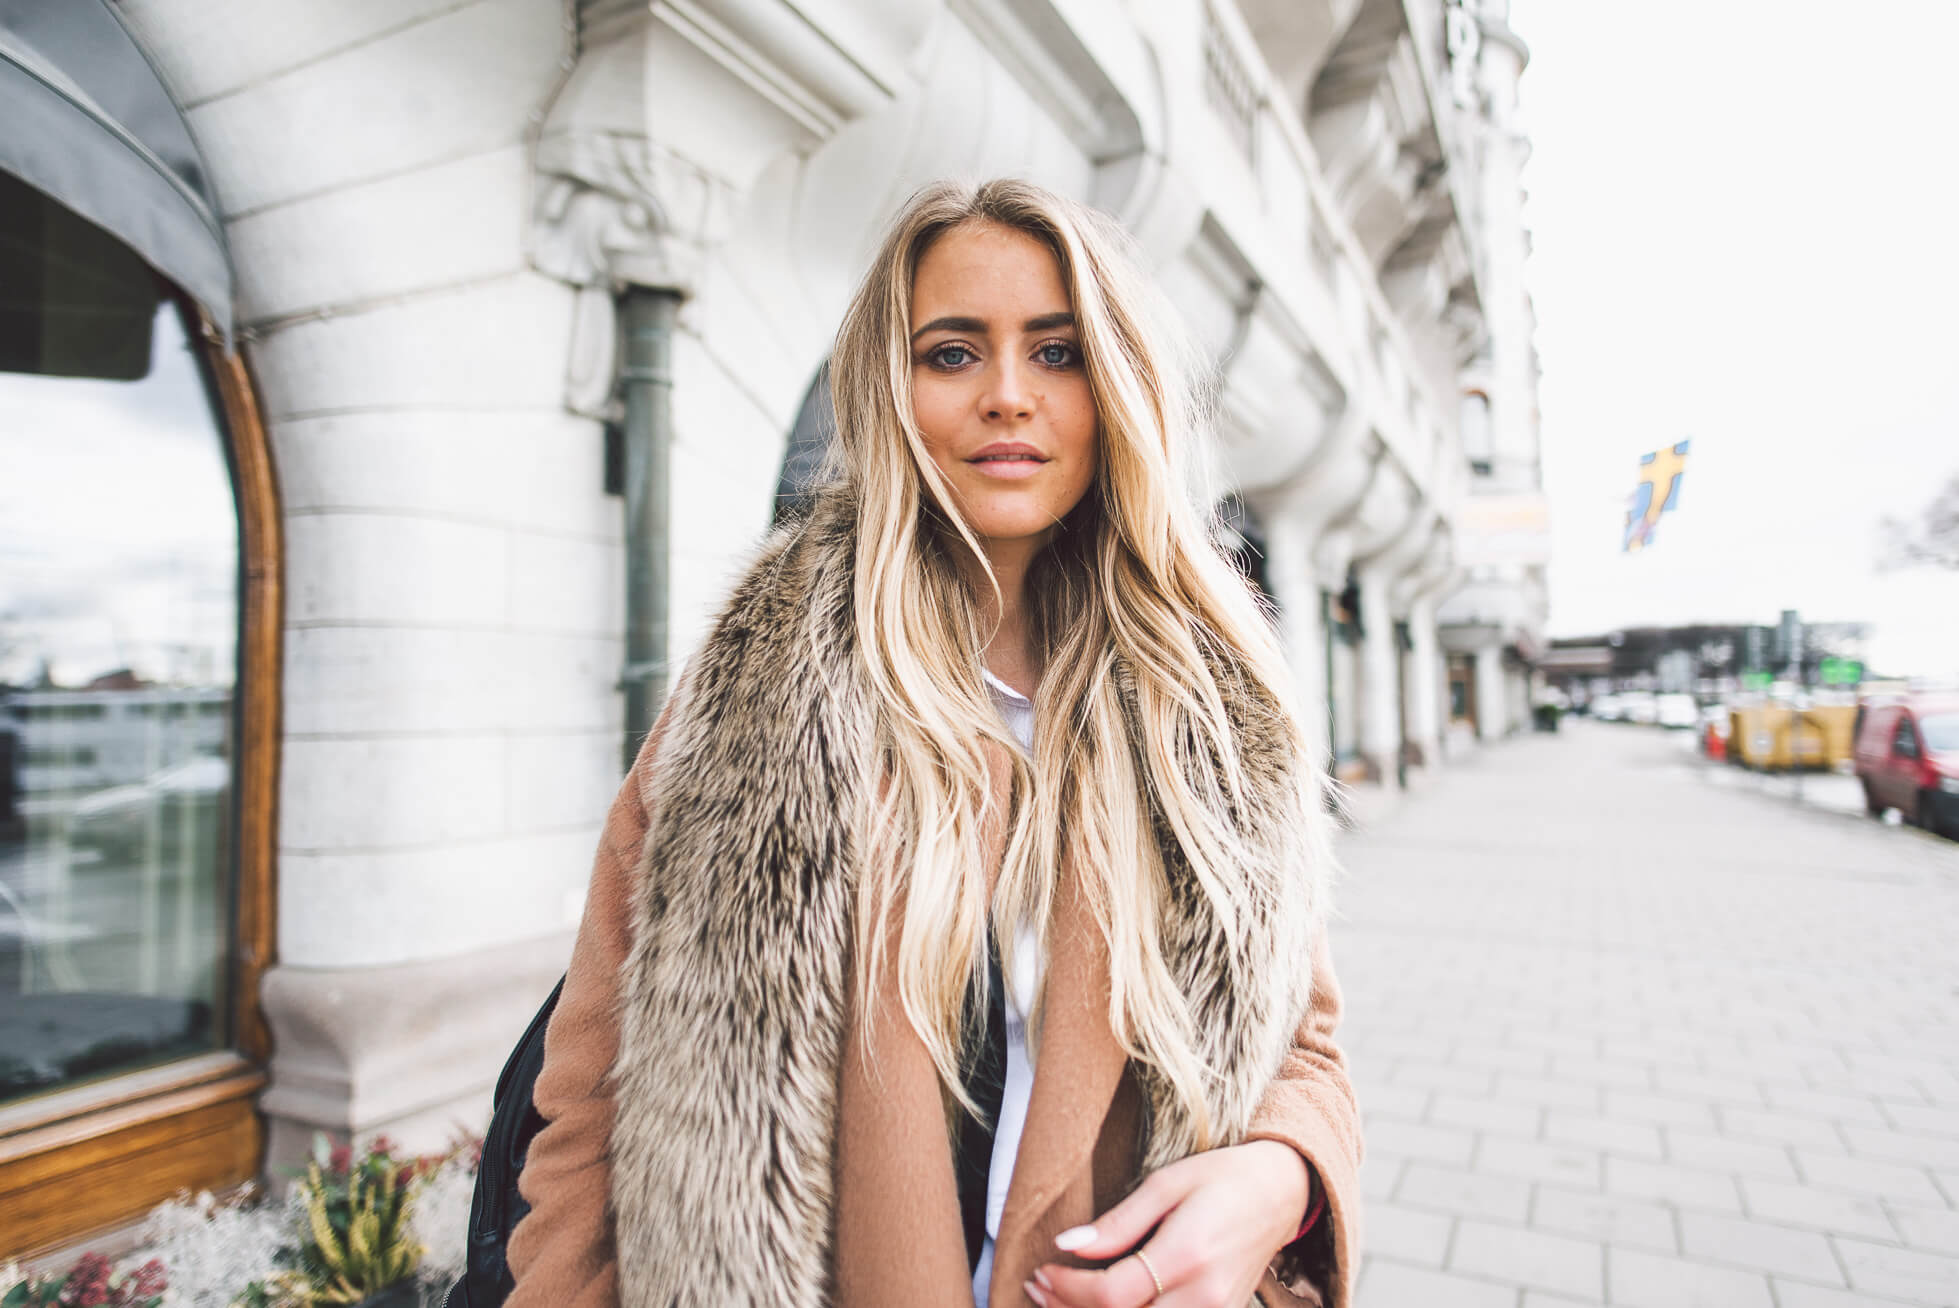 janni-deler-city-vibes-outfitDSC_8652